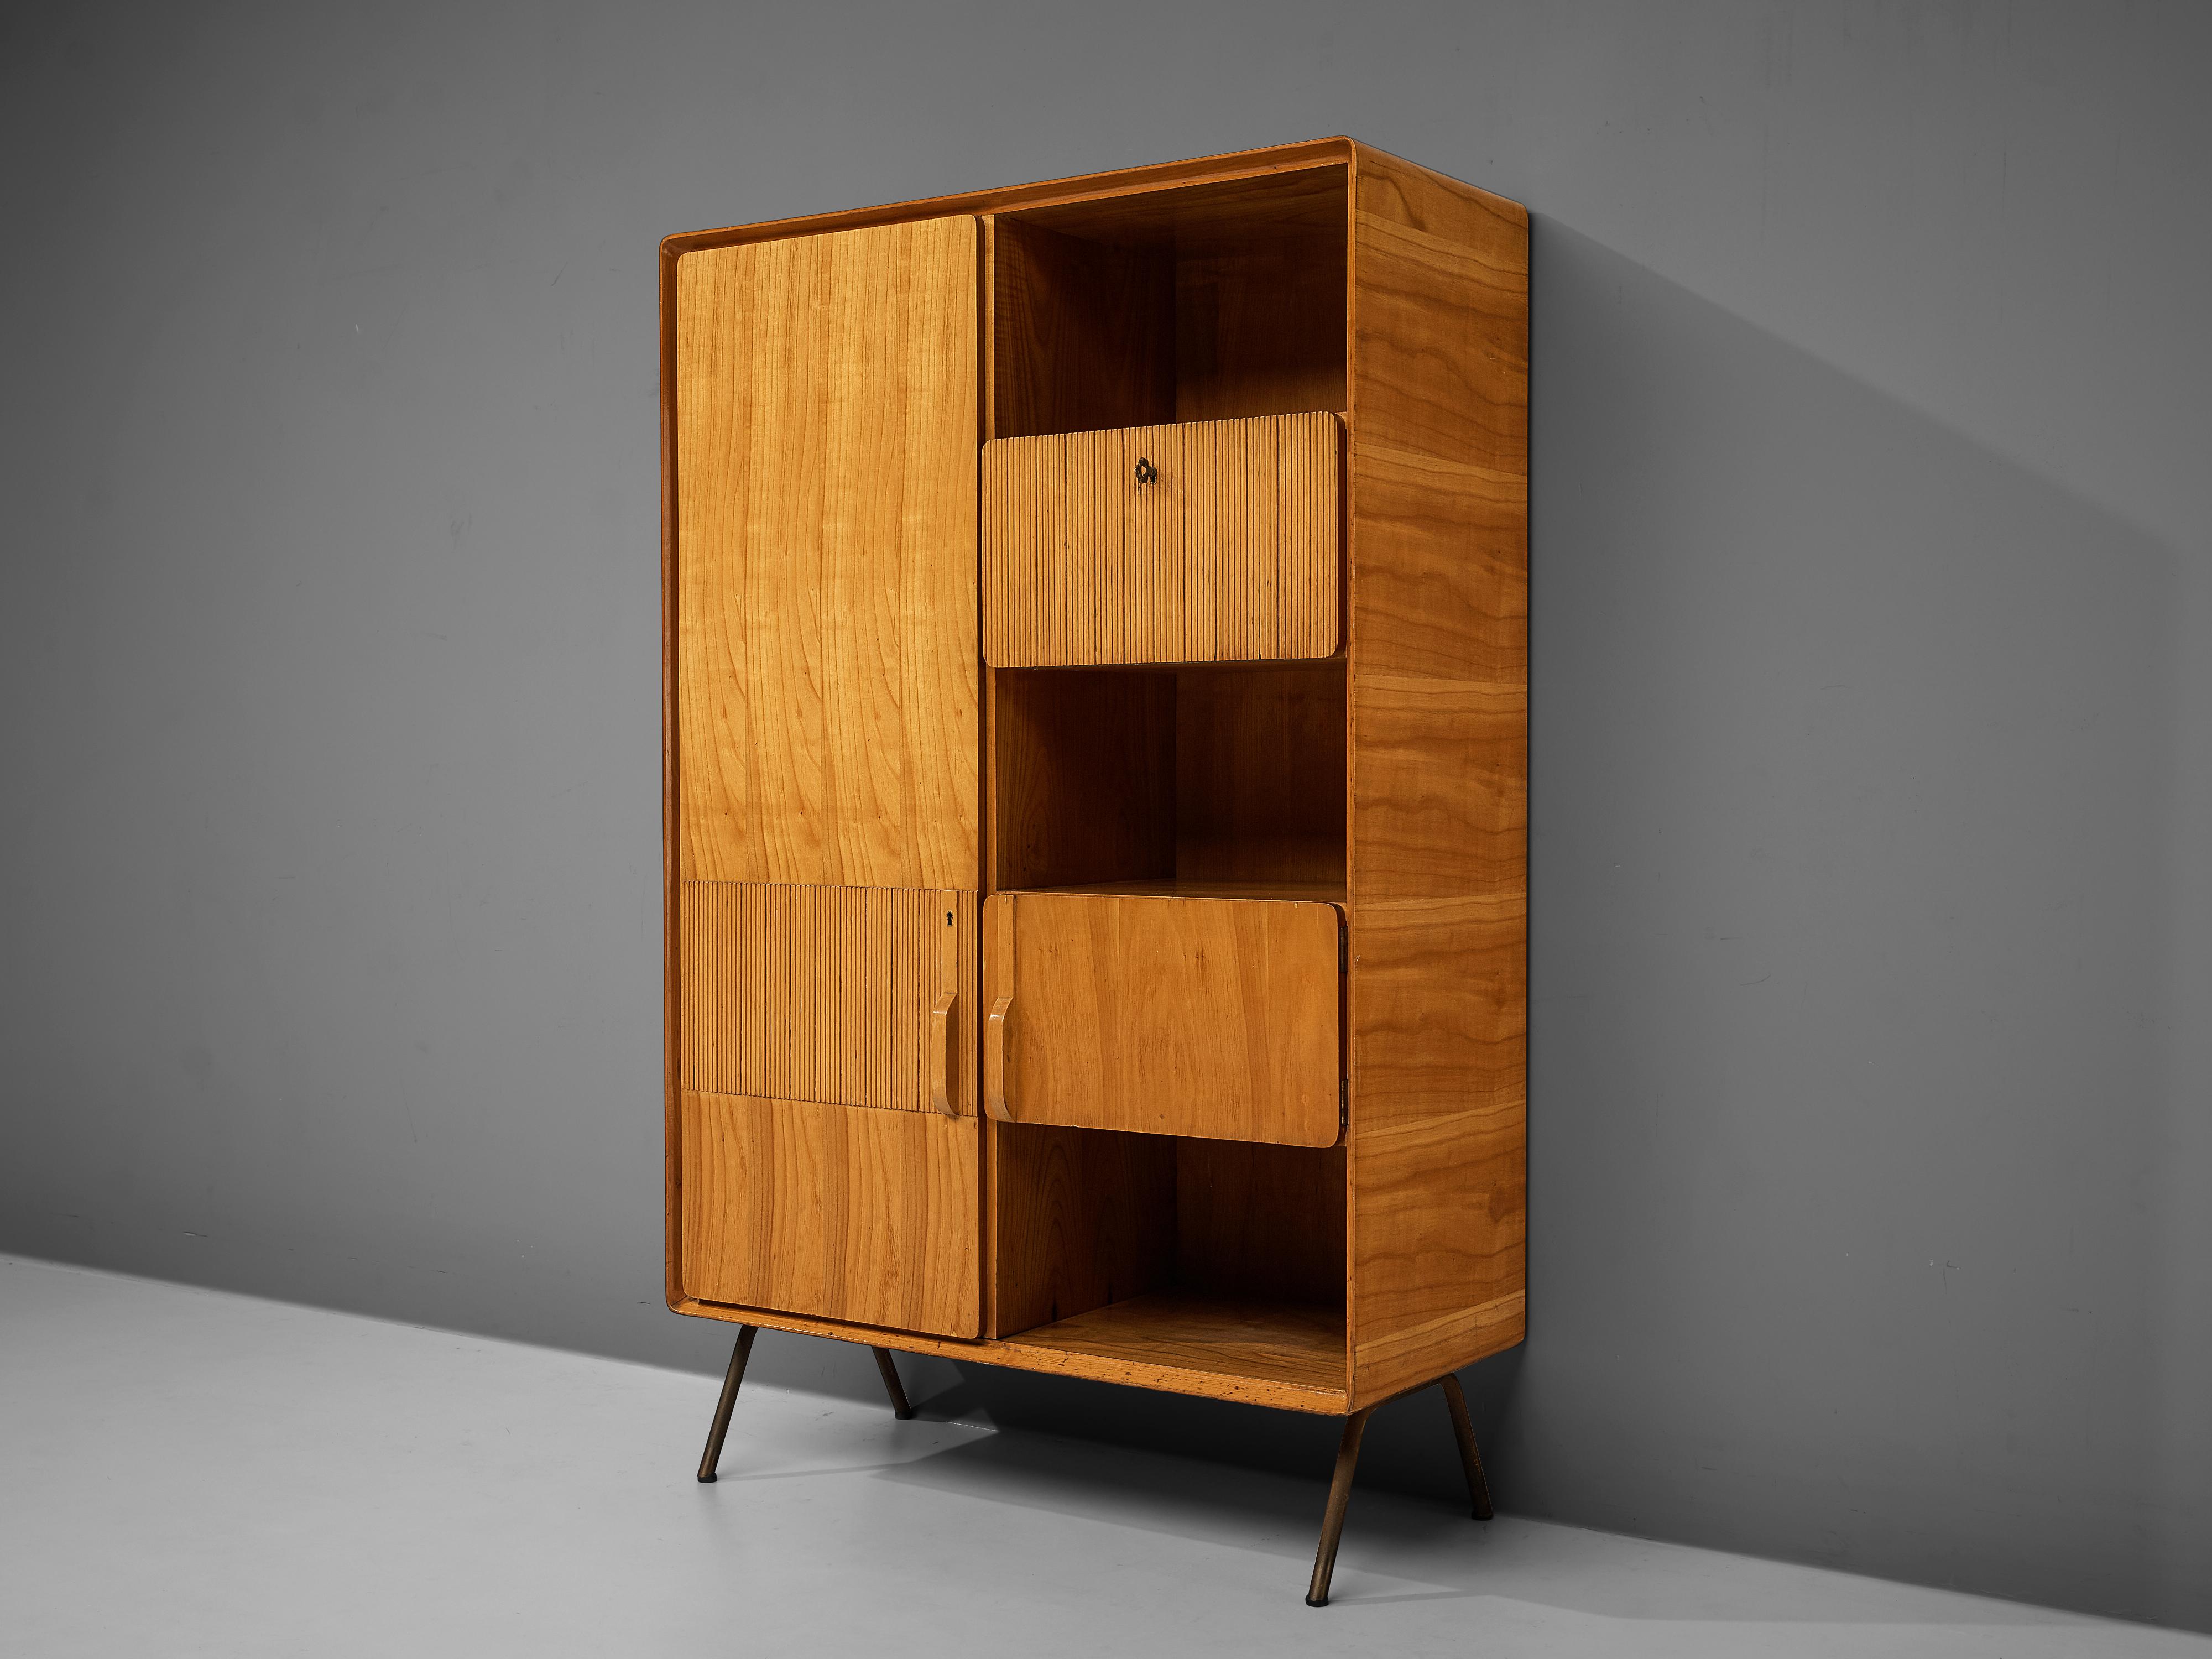 Wardrobe, cherry, mahogany, brass, Italy, 1950s

Elegant Italian wardrobe in cherry with brass legs. The cubic shape of the piece features a door on one side and an open storage as well as two closed compartments on the other side. Together, this